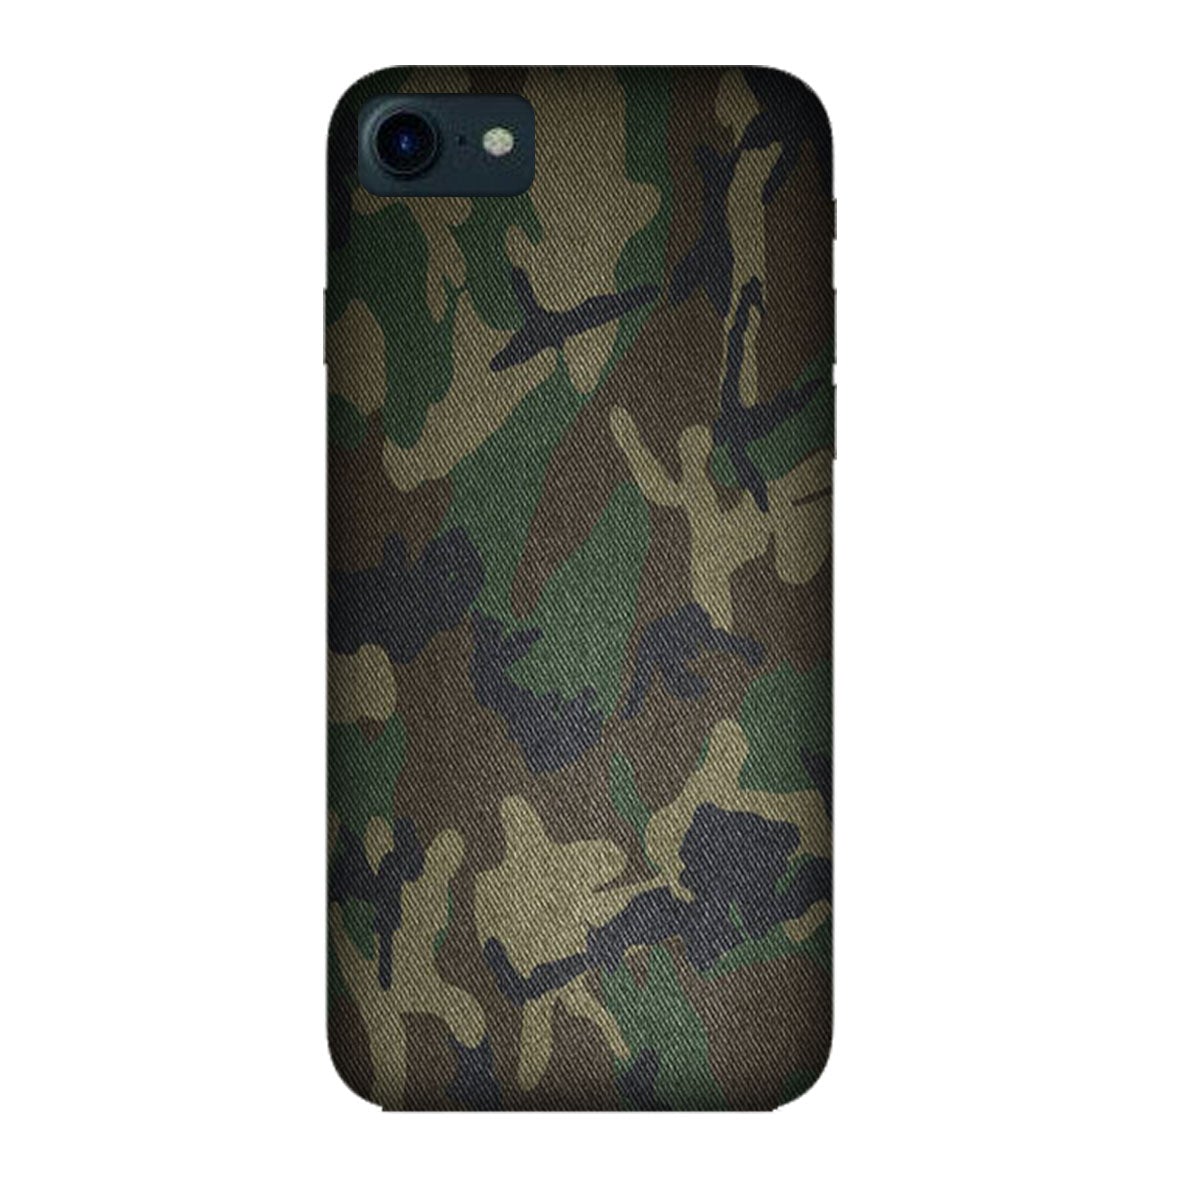 Camoflauge - Mobile Phone Cover - Hard Case